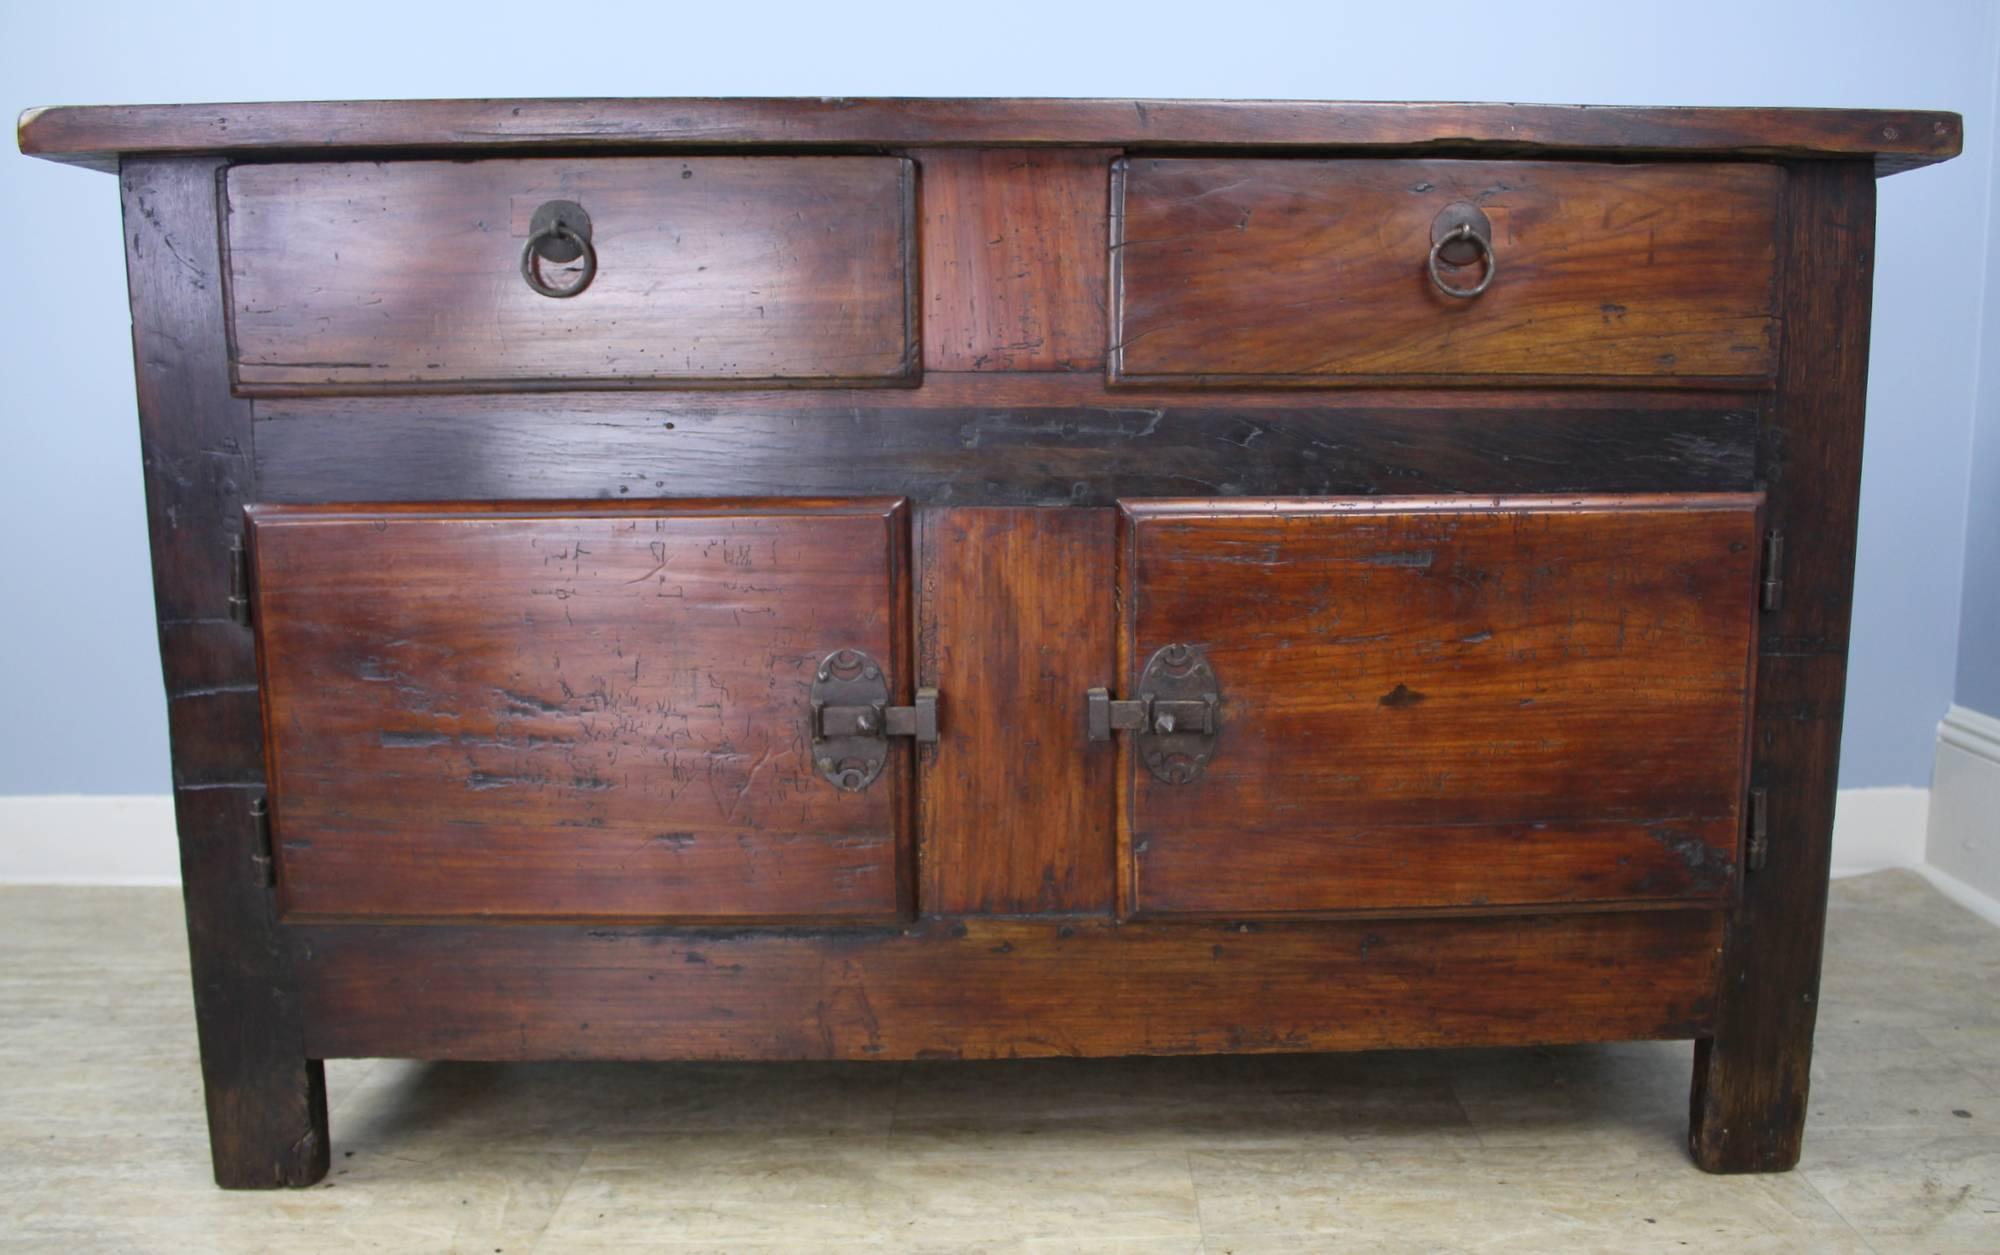 A handsome buffet or console fashioned of mixed fruitwoods. Large storage space under two roomy drawers. Rustic wrought iron hardware with classic ring pulls.